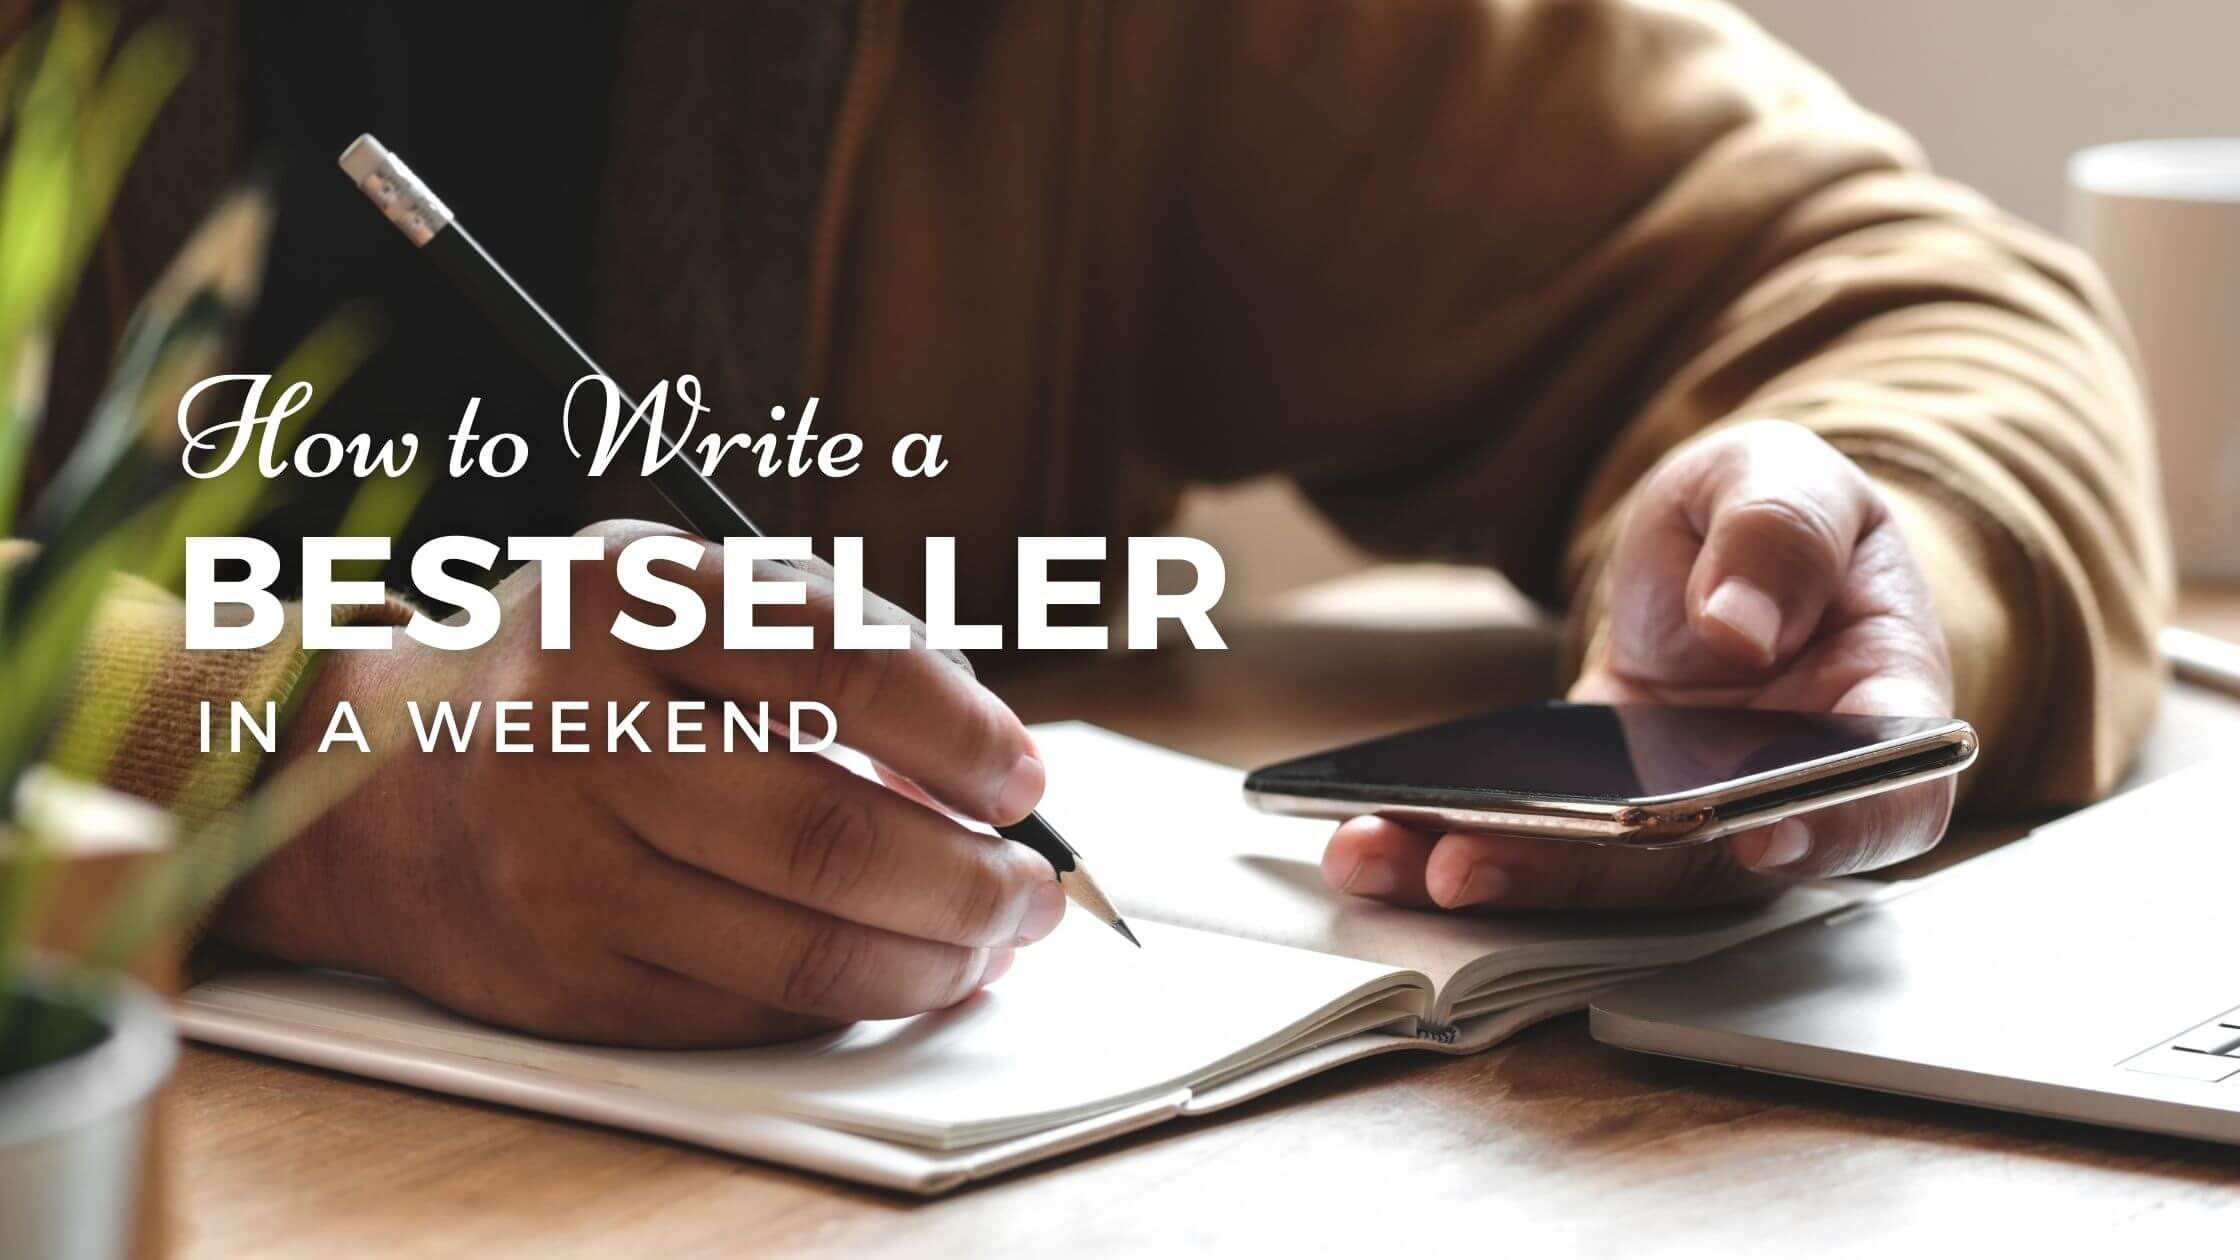 How to Write a Bestseller in a Weekend